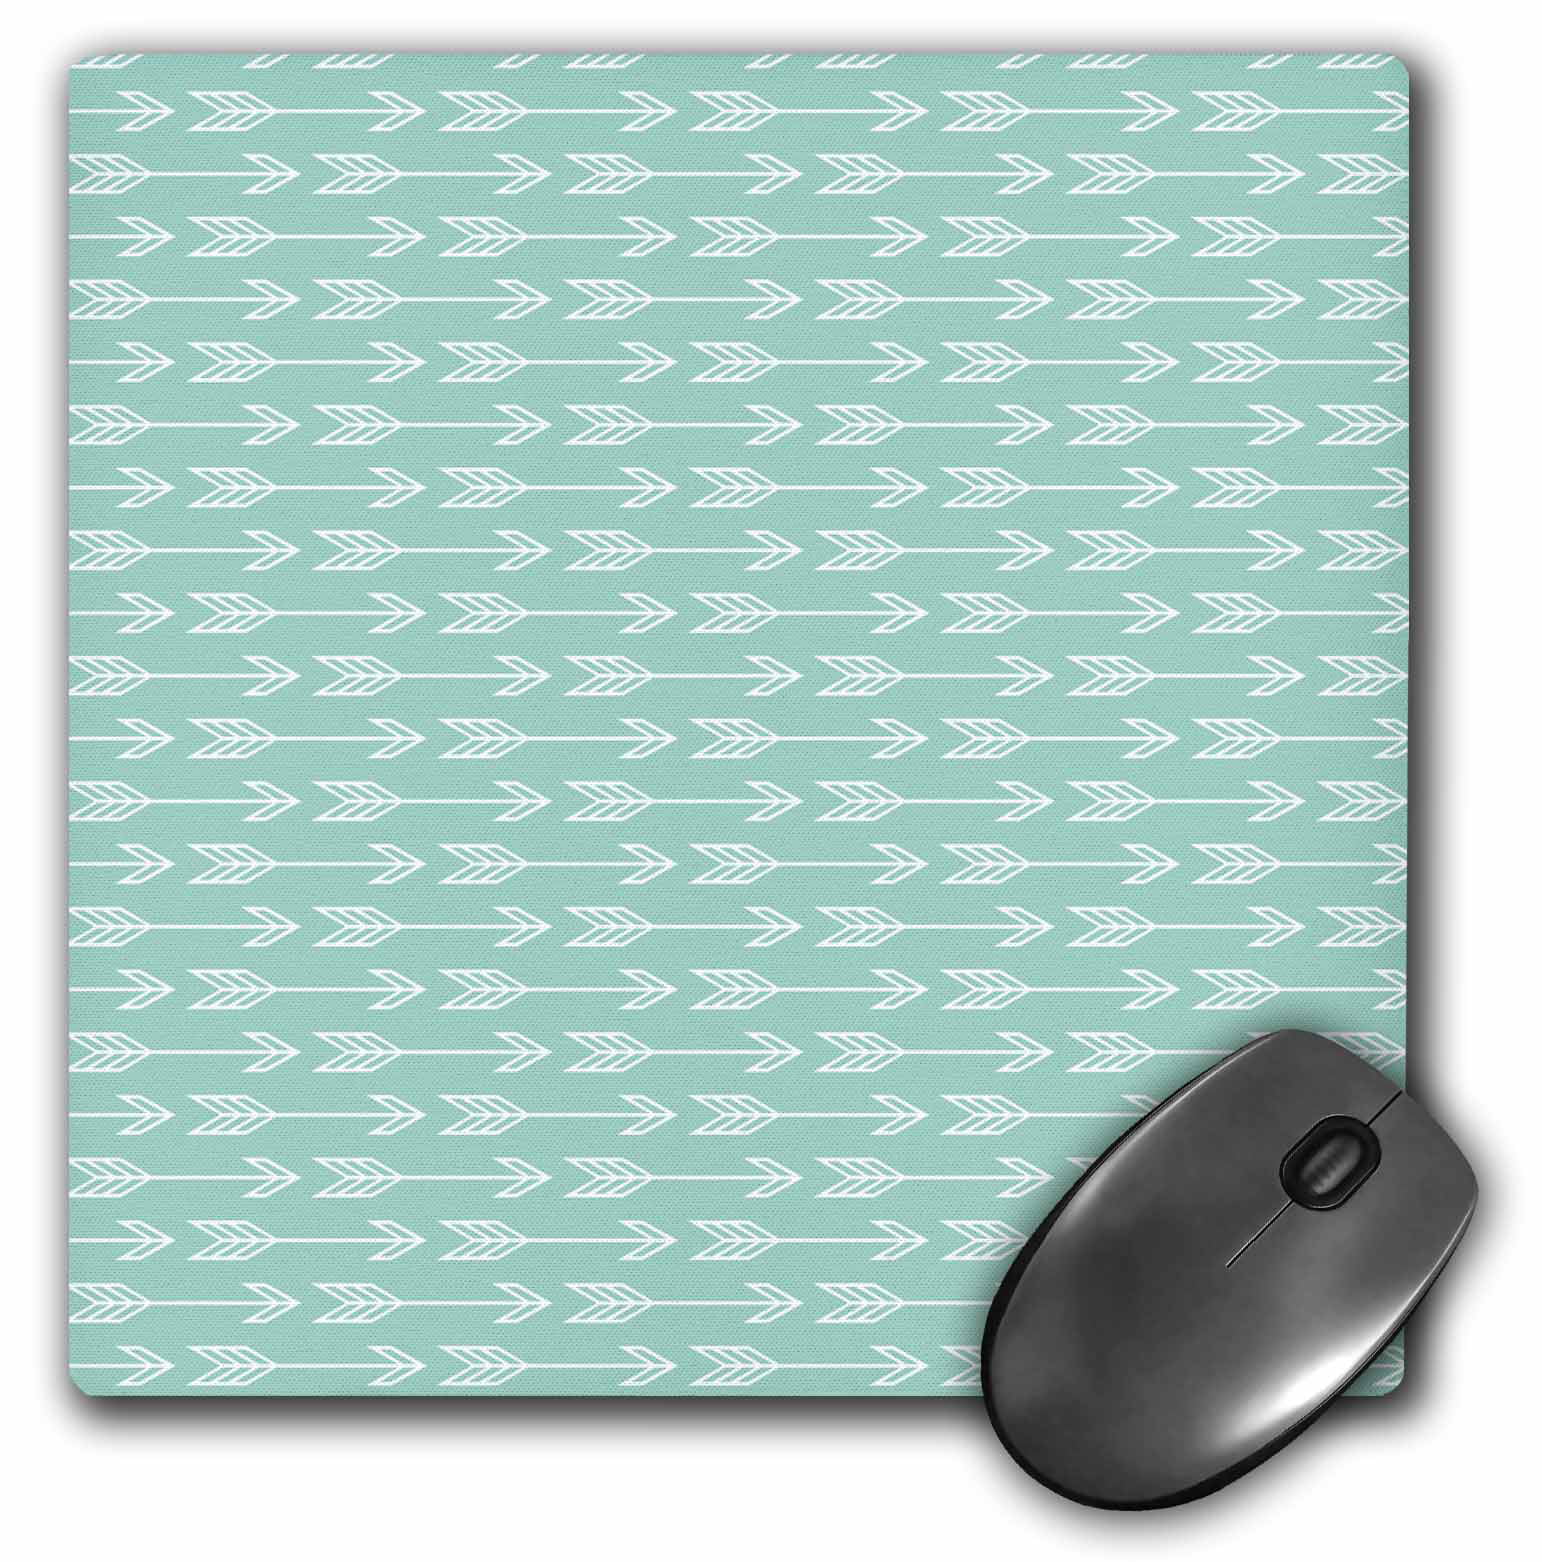 Football Mouse Pad Sublimation Blank Sublimation Blank Sports Neoprene  Mousepad Black Rubber Backed 9.75 x 6.5 x .1 Football MP96 (5Pack)